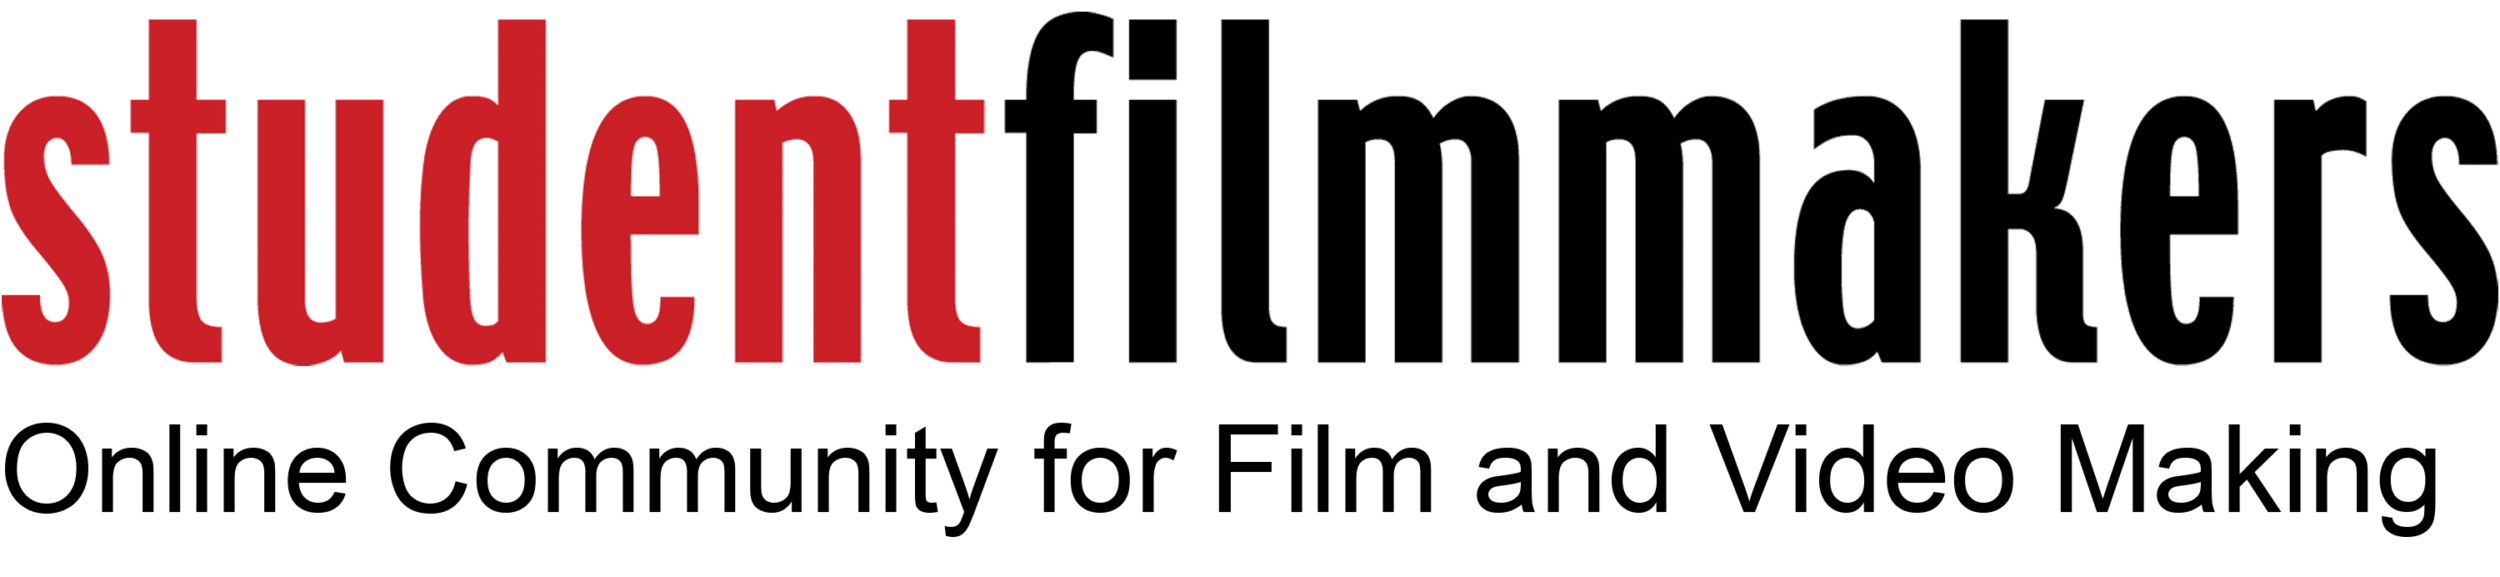 StudentFilmmakers.com: Online Community for Film and Video Making